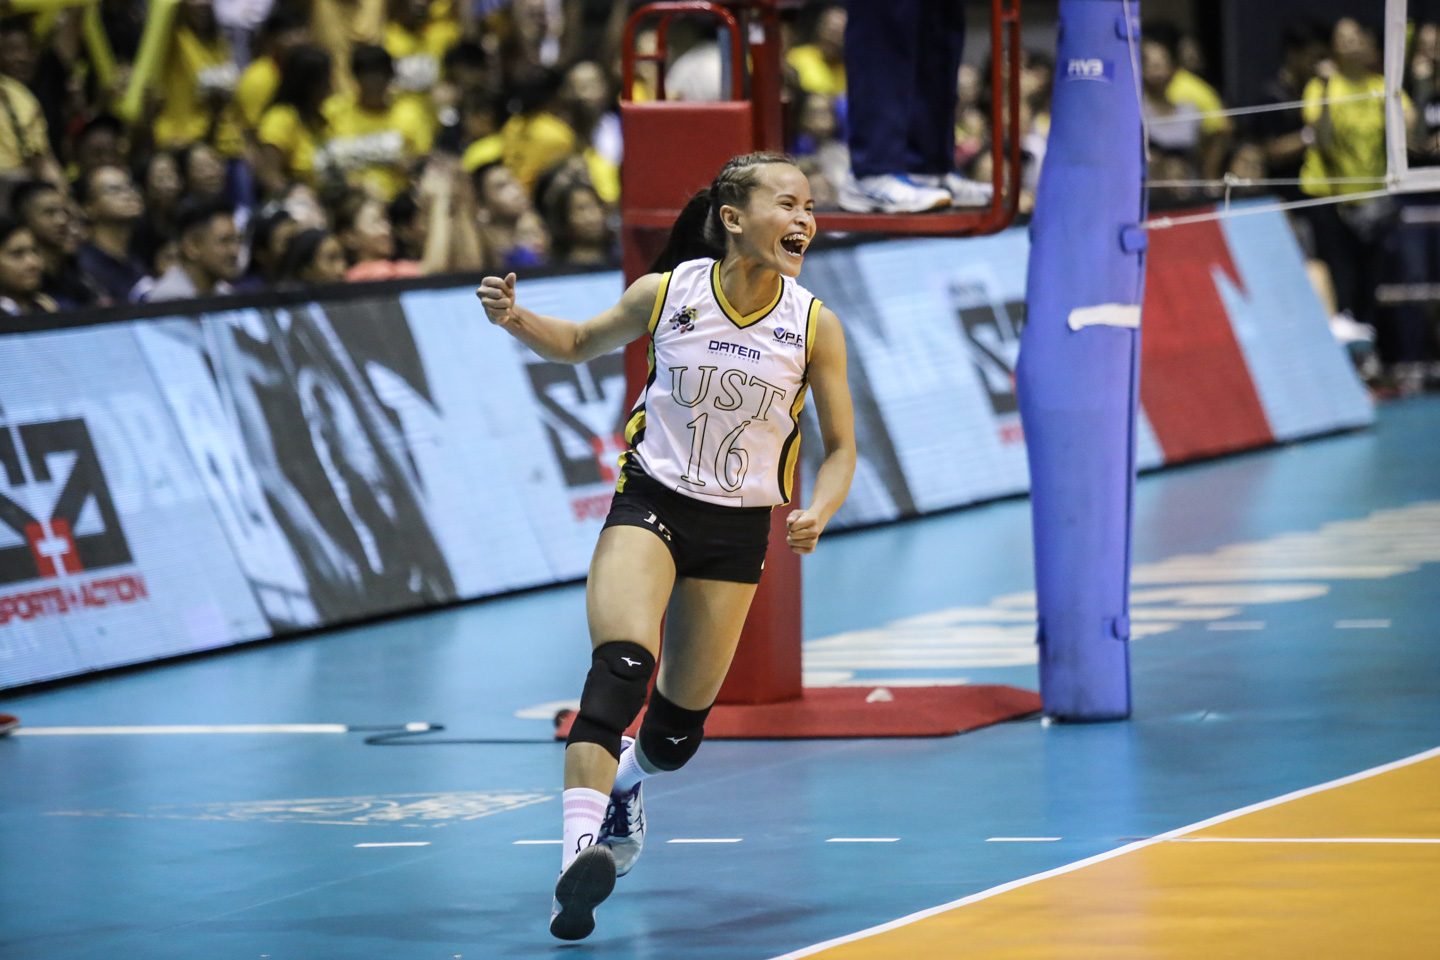 WATCH: UST sweeps 3rd straight UAAP general championship